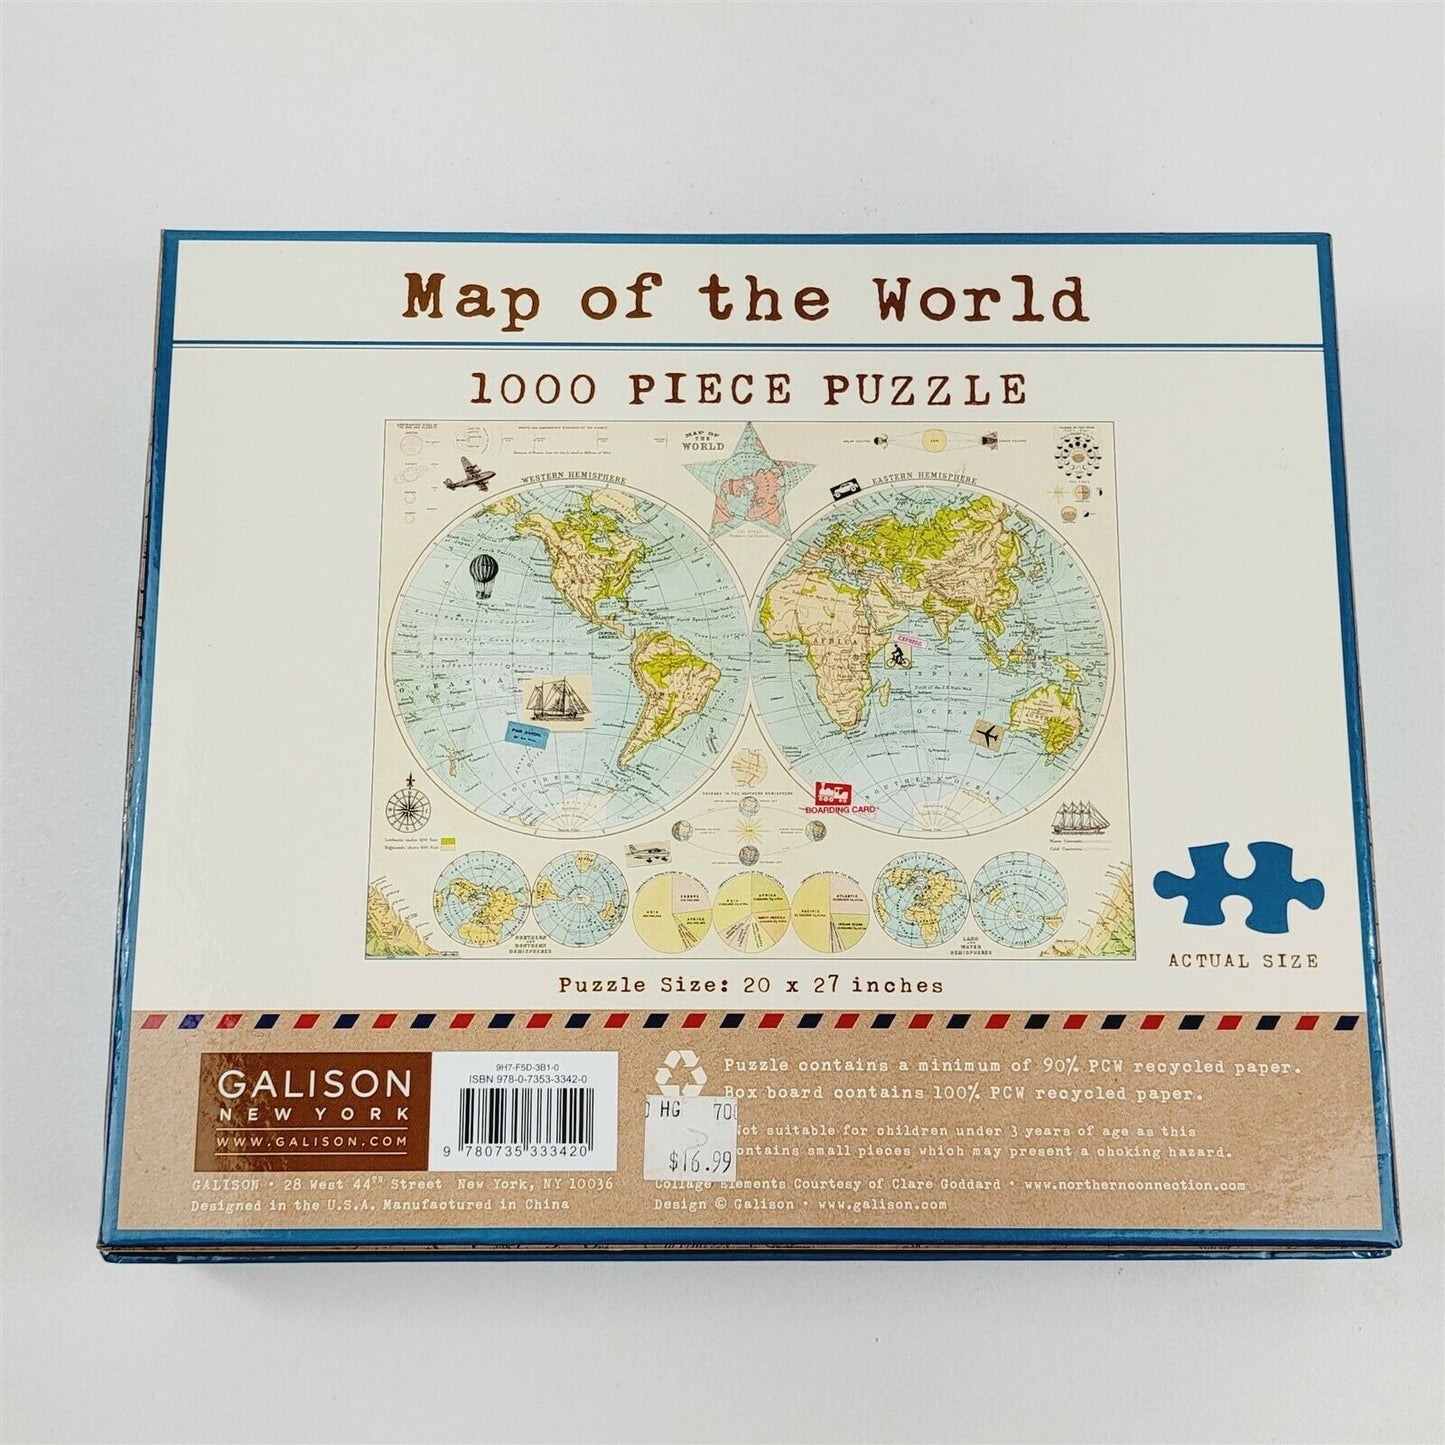 Map of the World Western & Eastern Hemispheres 1000 Piece Jigsaw Puzzle